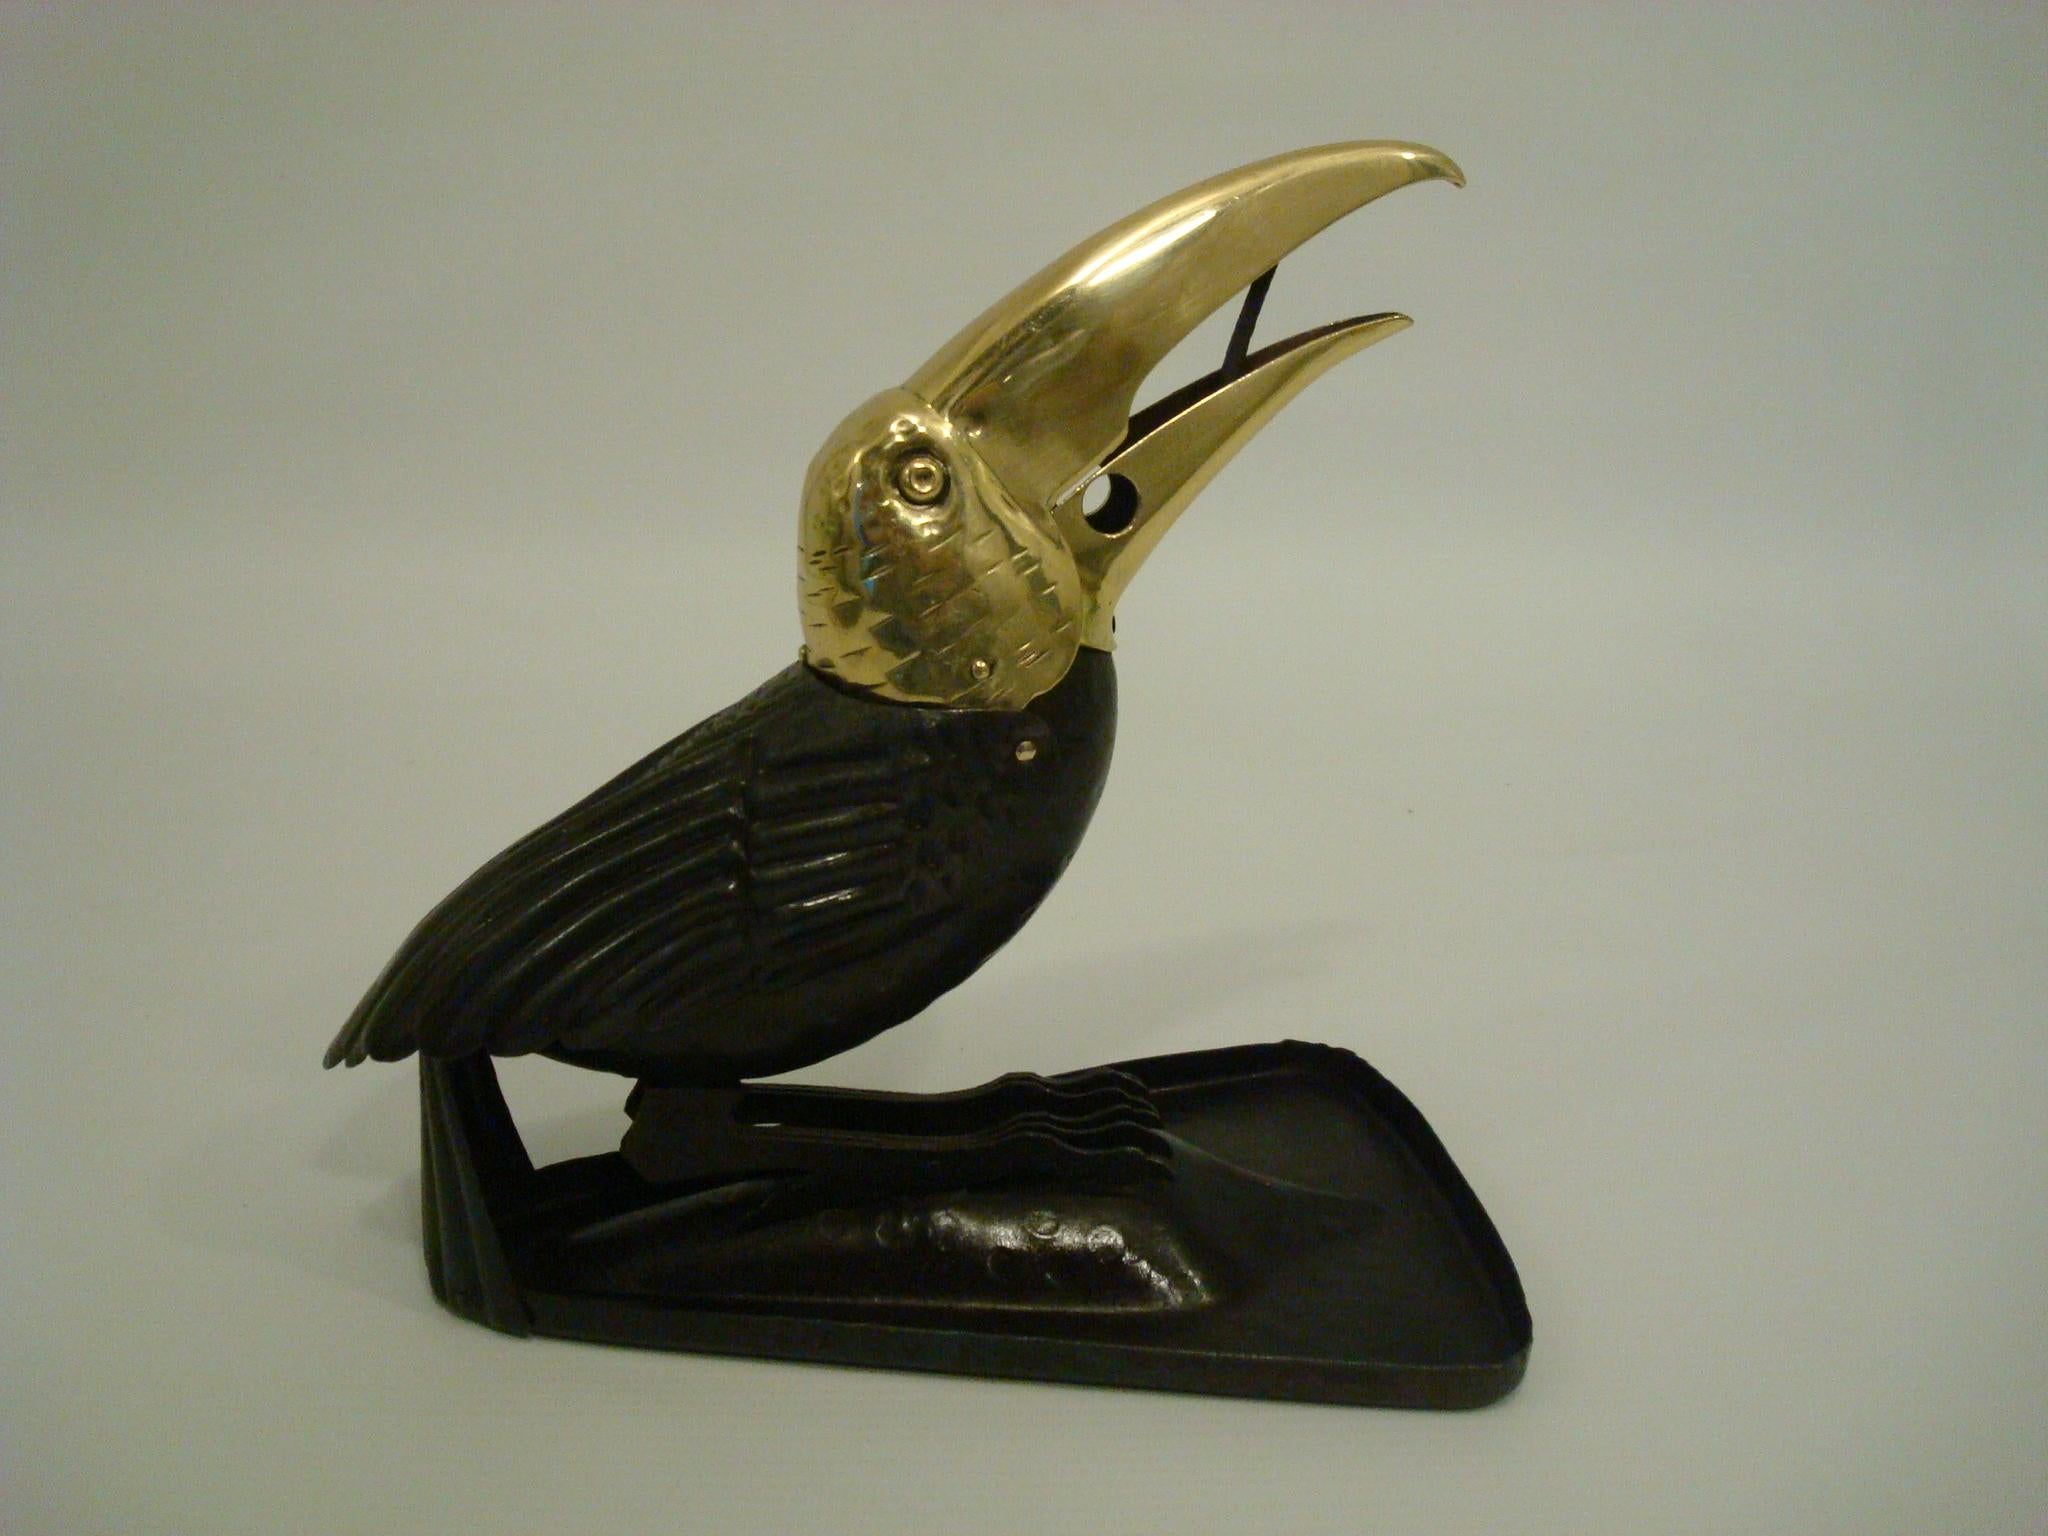 An A von Zschock brass and enameled and painted metal toucan form design table top cigar cutter, Berlin, early 20th century.
Marks: A.v. Zschock, Gladenbeck
Cigar cutter in a shape of a Toucan circa 1900-1910 Strasbourg by Adolf von Zschock.

